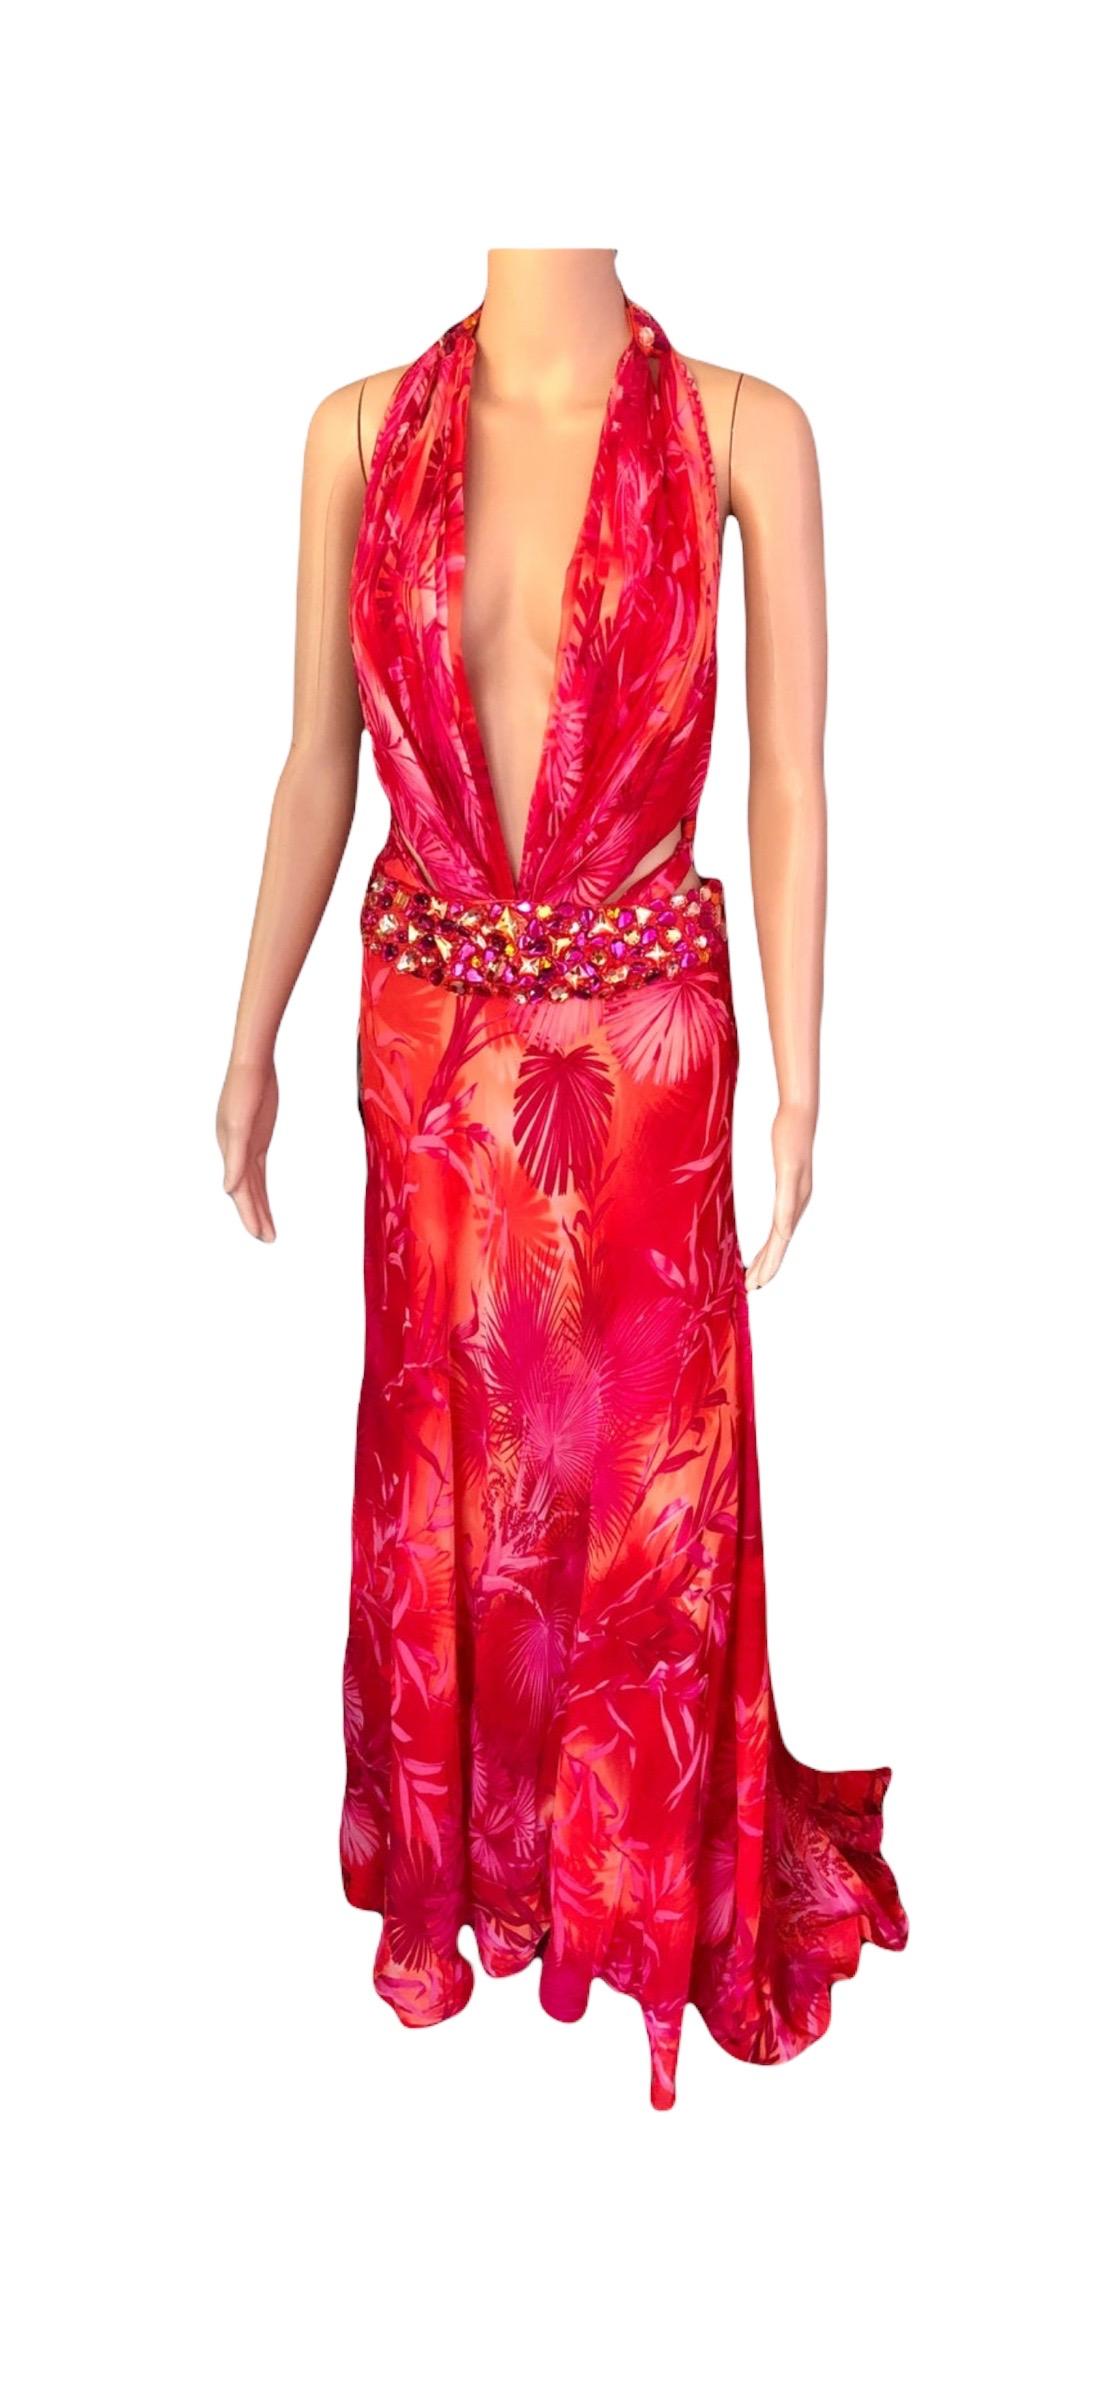 Gianni Versace S/S 2000 Runway Embellished Jungle Print Evening Dress Gown 4